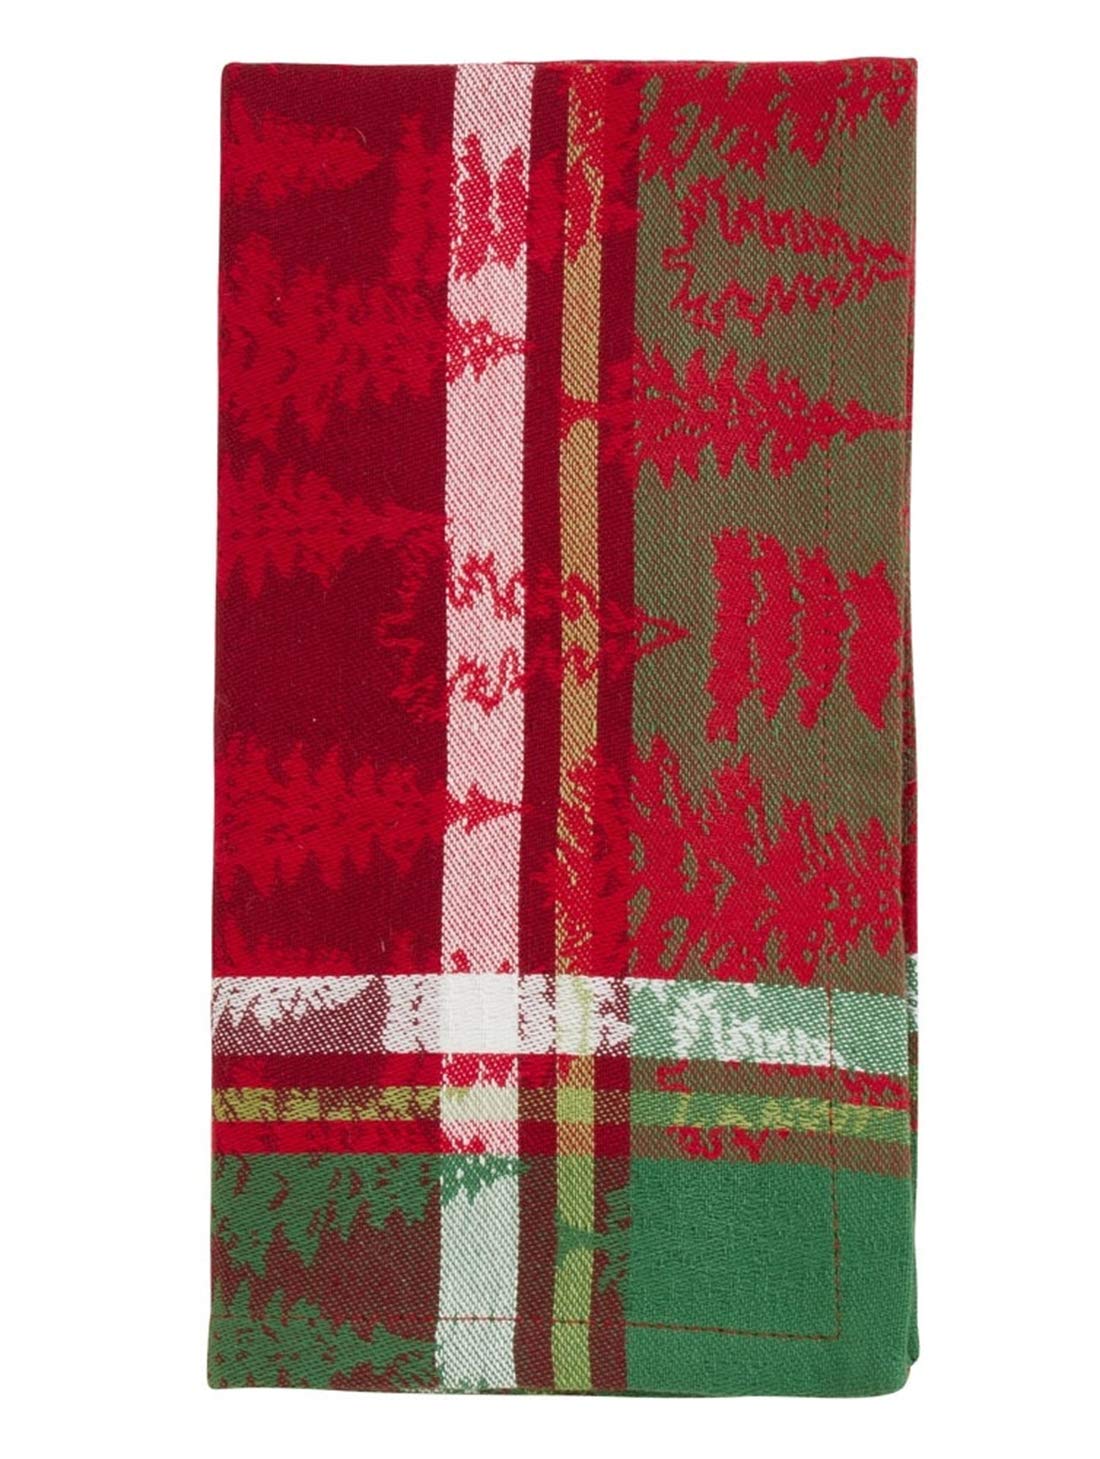 Fennco Styles Christmas Tree Plaid Design 100% Cotton Table Linens - Various Sizes for Home, Holiday, Family Gathering and Special Occasion